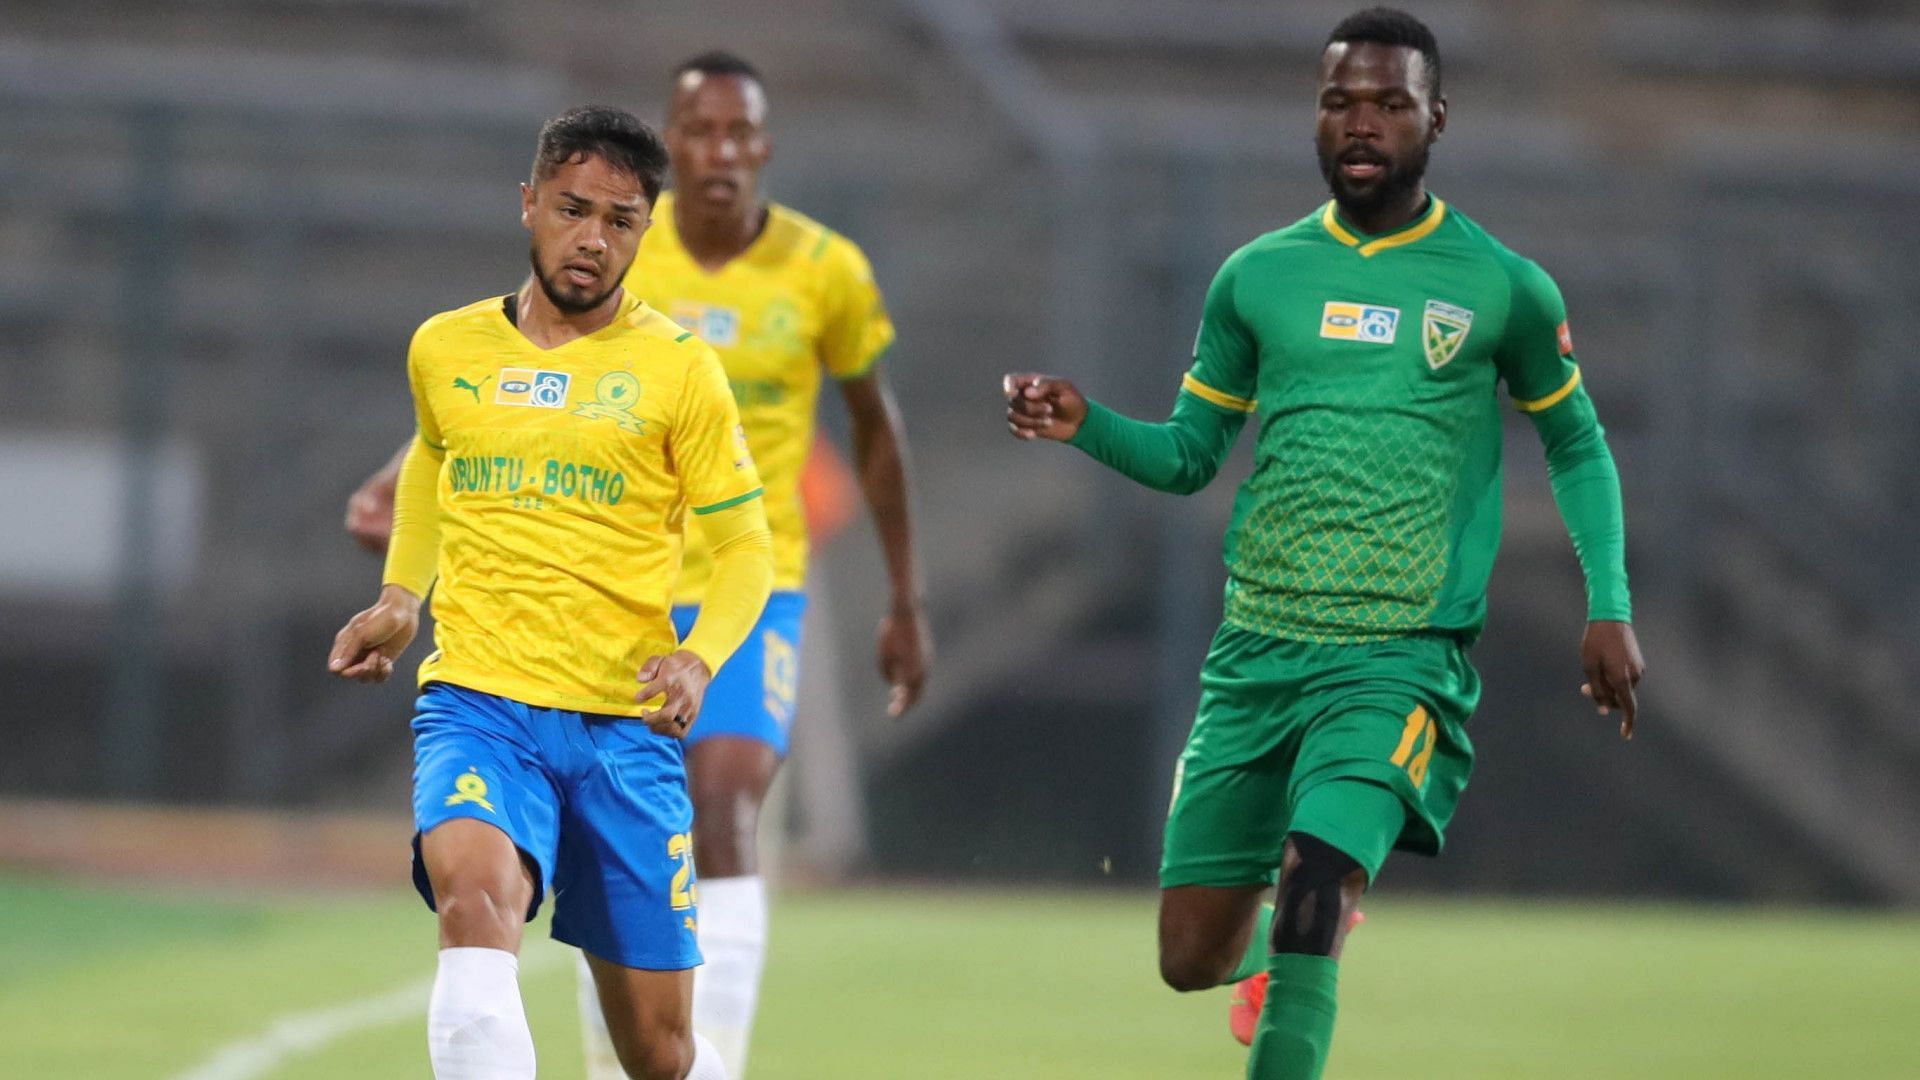 Mamelodi Sundowns take on Golden Arrows this weekend. Image Source: Goal